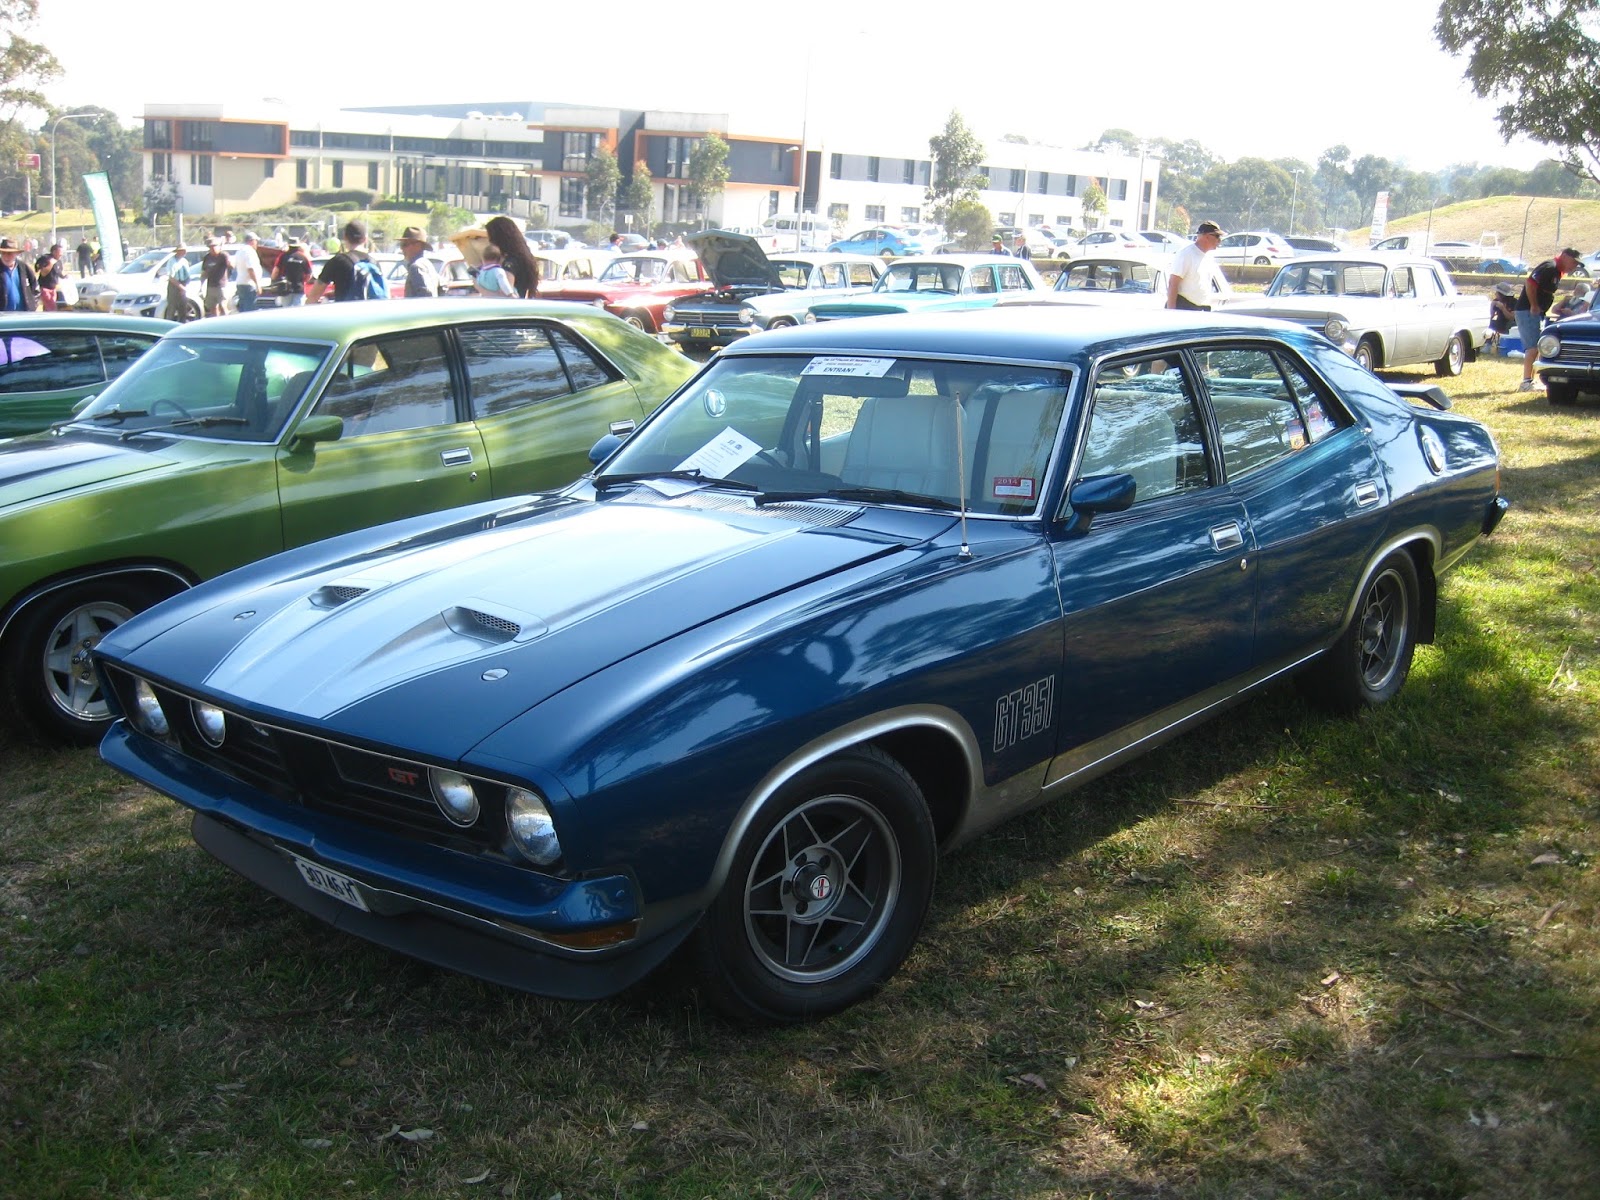 Aussie Old Parked Cars  1973 Ford XB Falcon GT Sedan